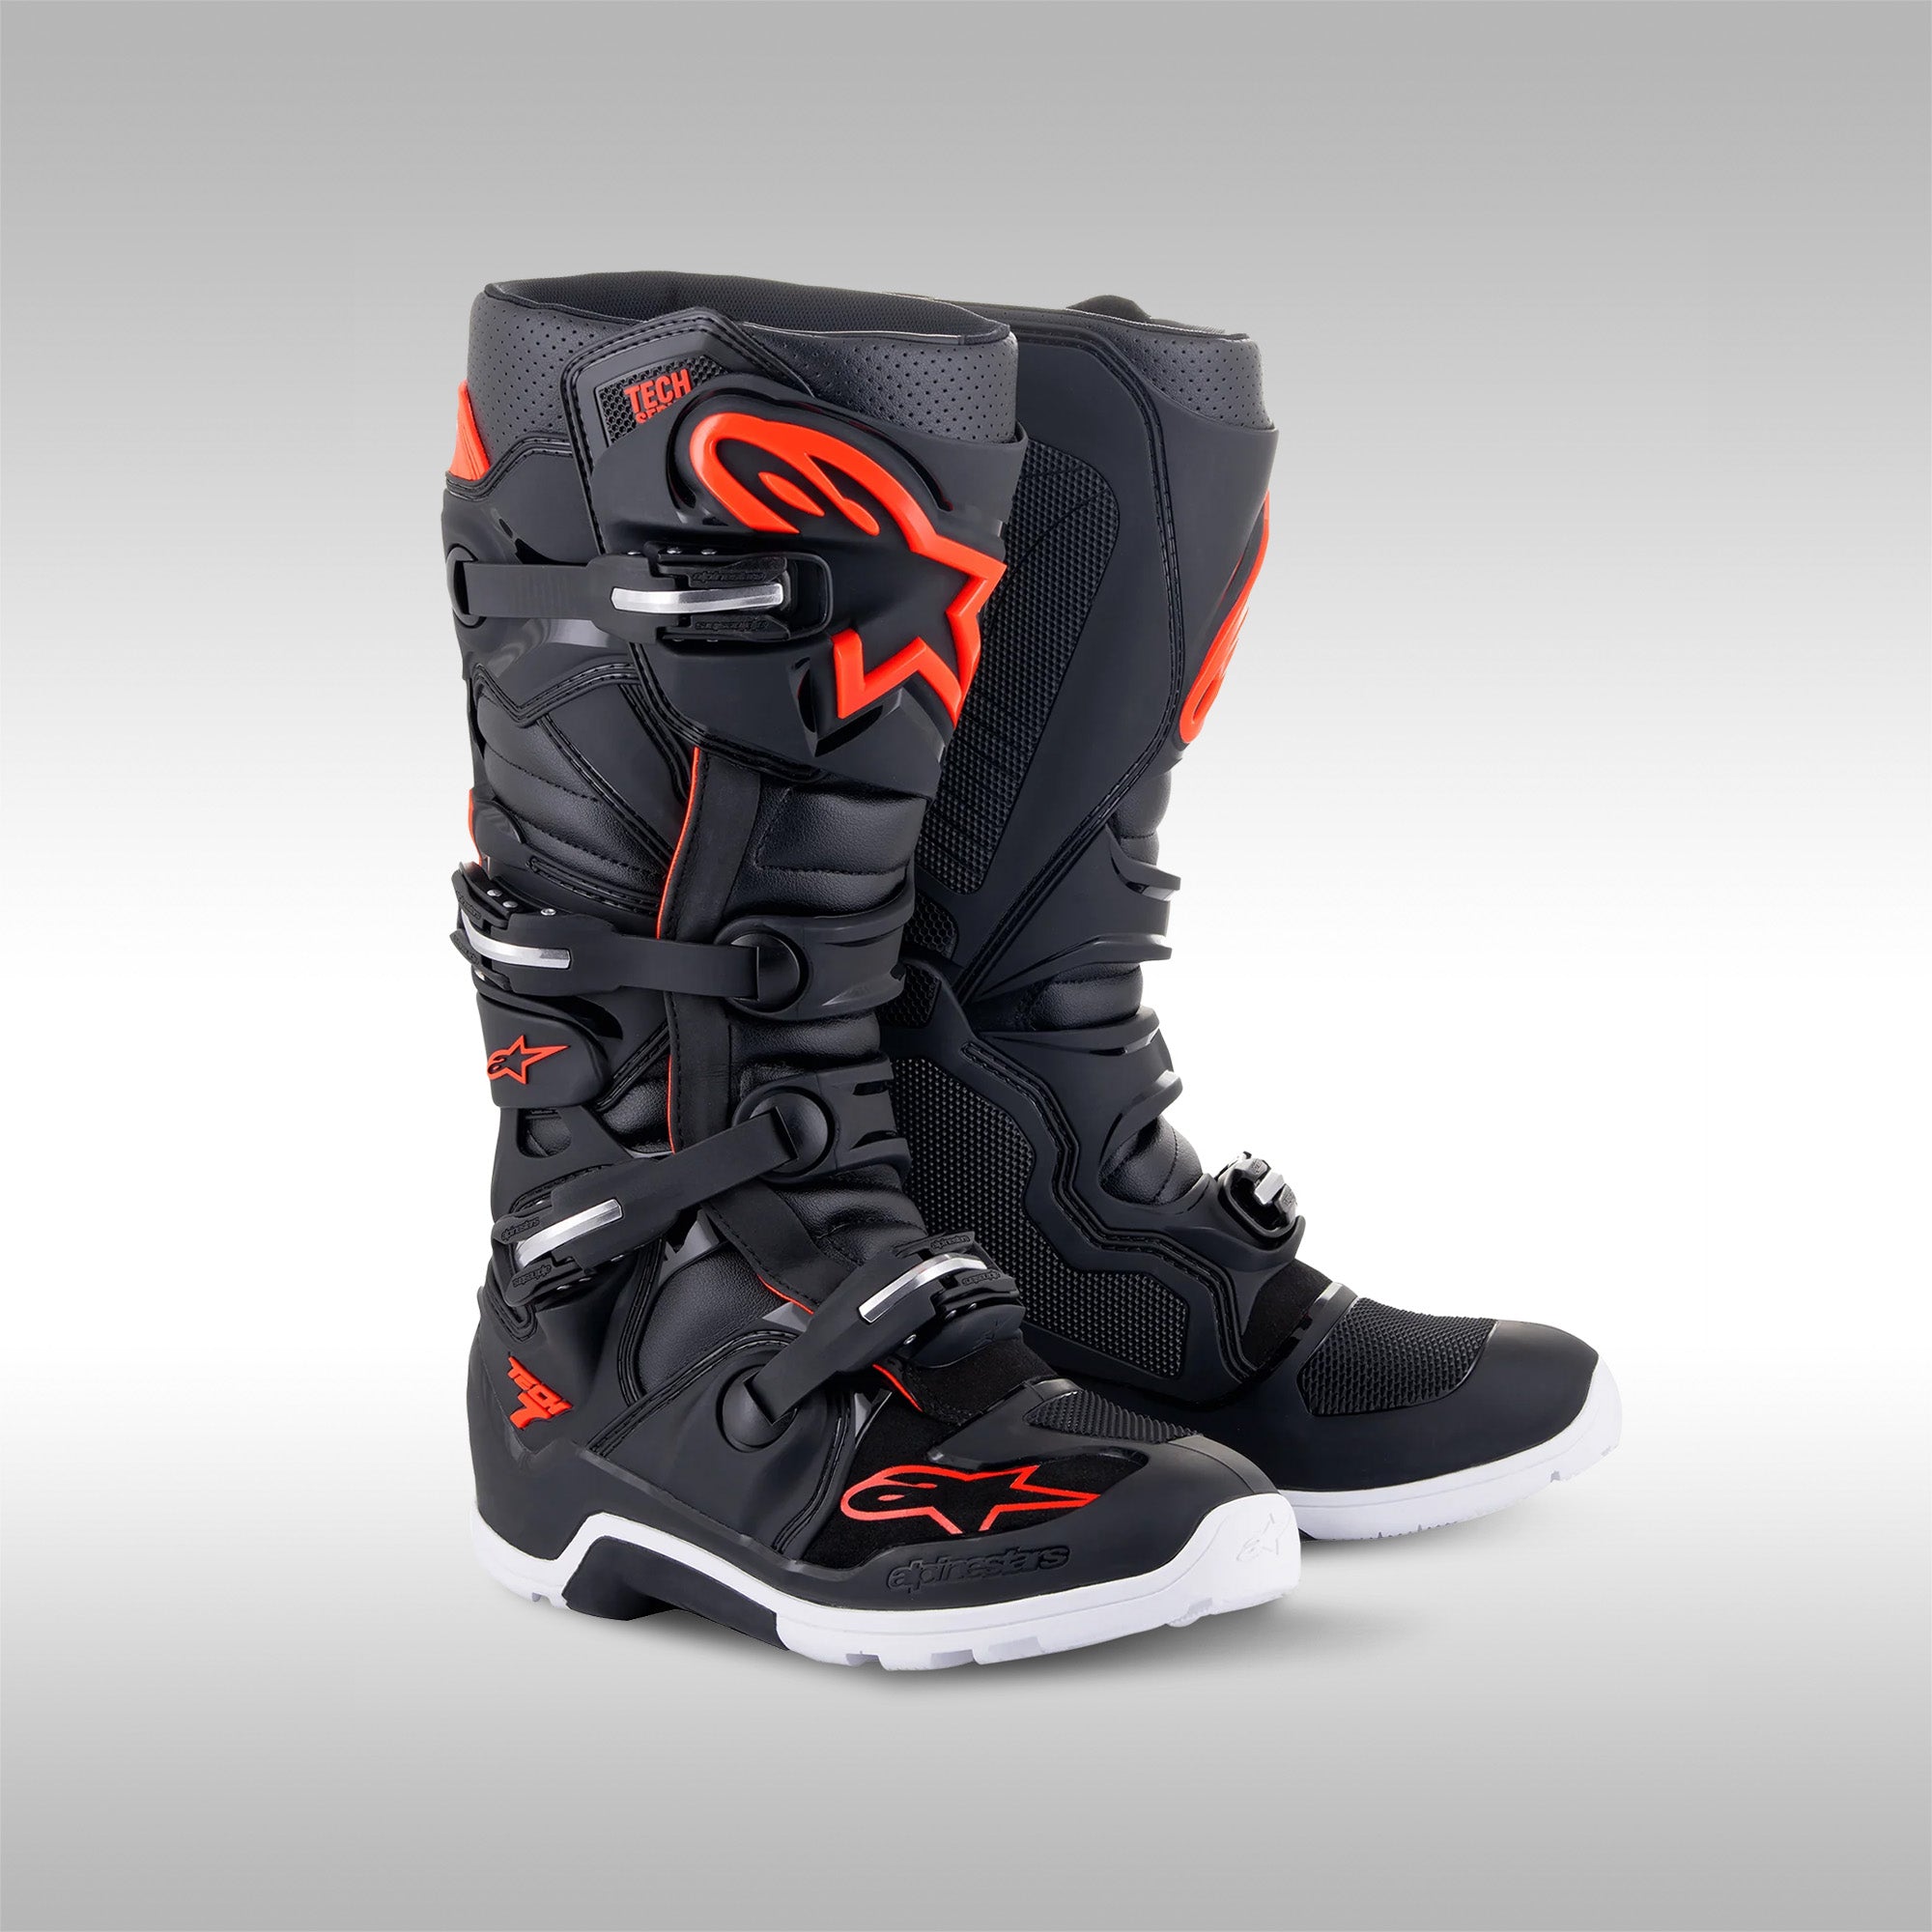 Alpinestars Tech 7 Enduro boots in the Light Gray, Dark Gray with Bright Red accent option. The left and right boot next to each other. Enduro and dualsport motorcycle boots. Protective gear for dirtbike riding.